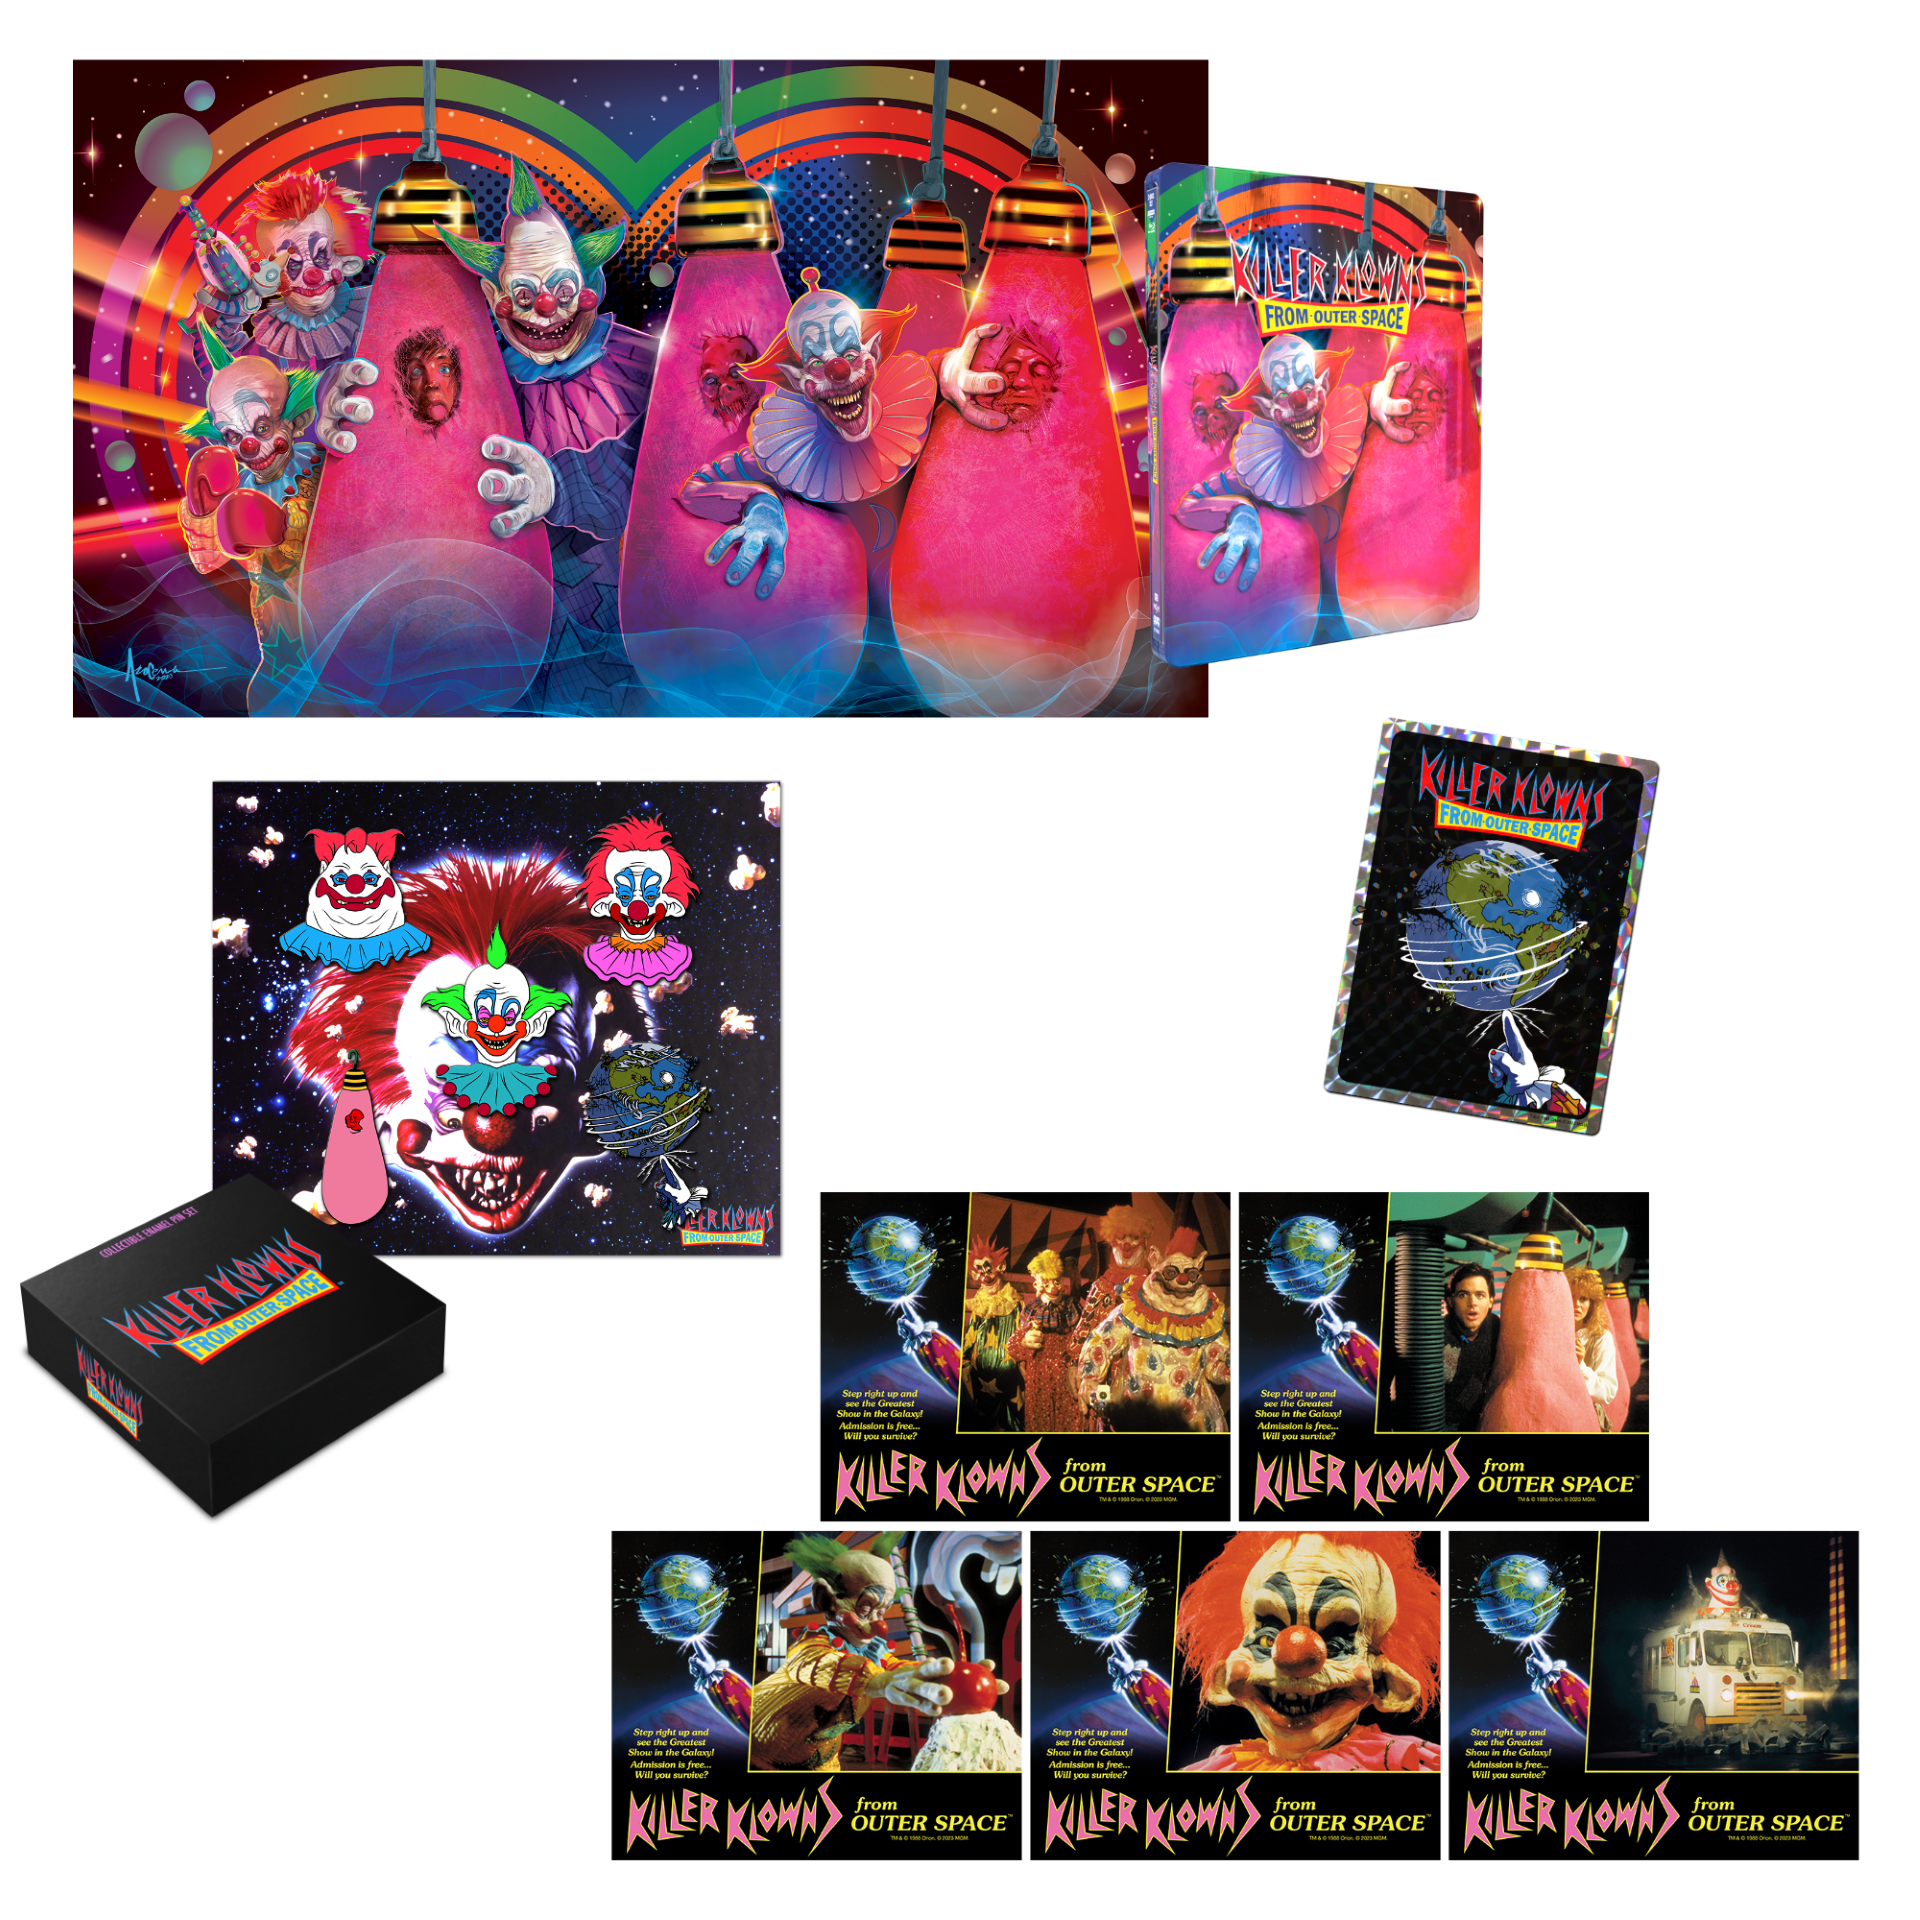 Killer Klowns From Outer Space [Limited 35th Anniversary Steelbook] + Exclusive Poster + Prism Sticker + Enamel Pins + Lobby Cards - Shout! Factory